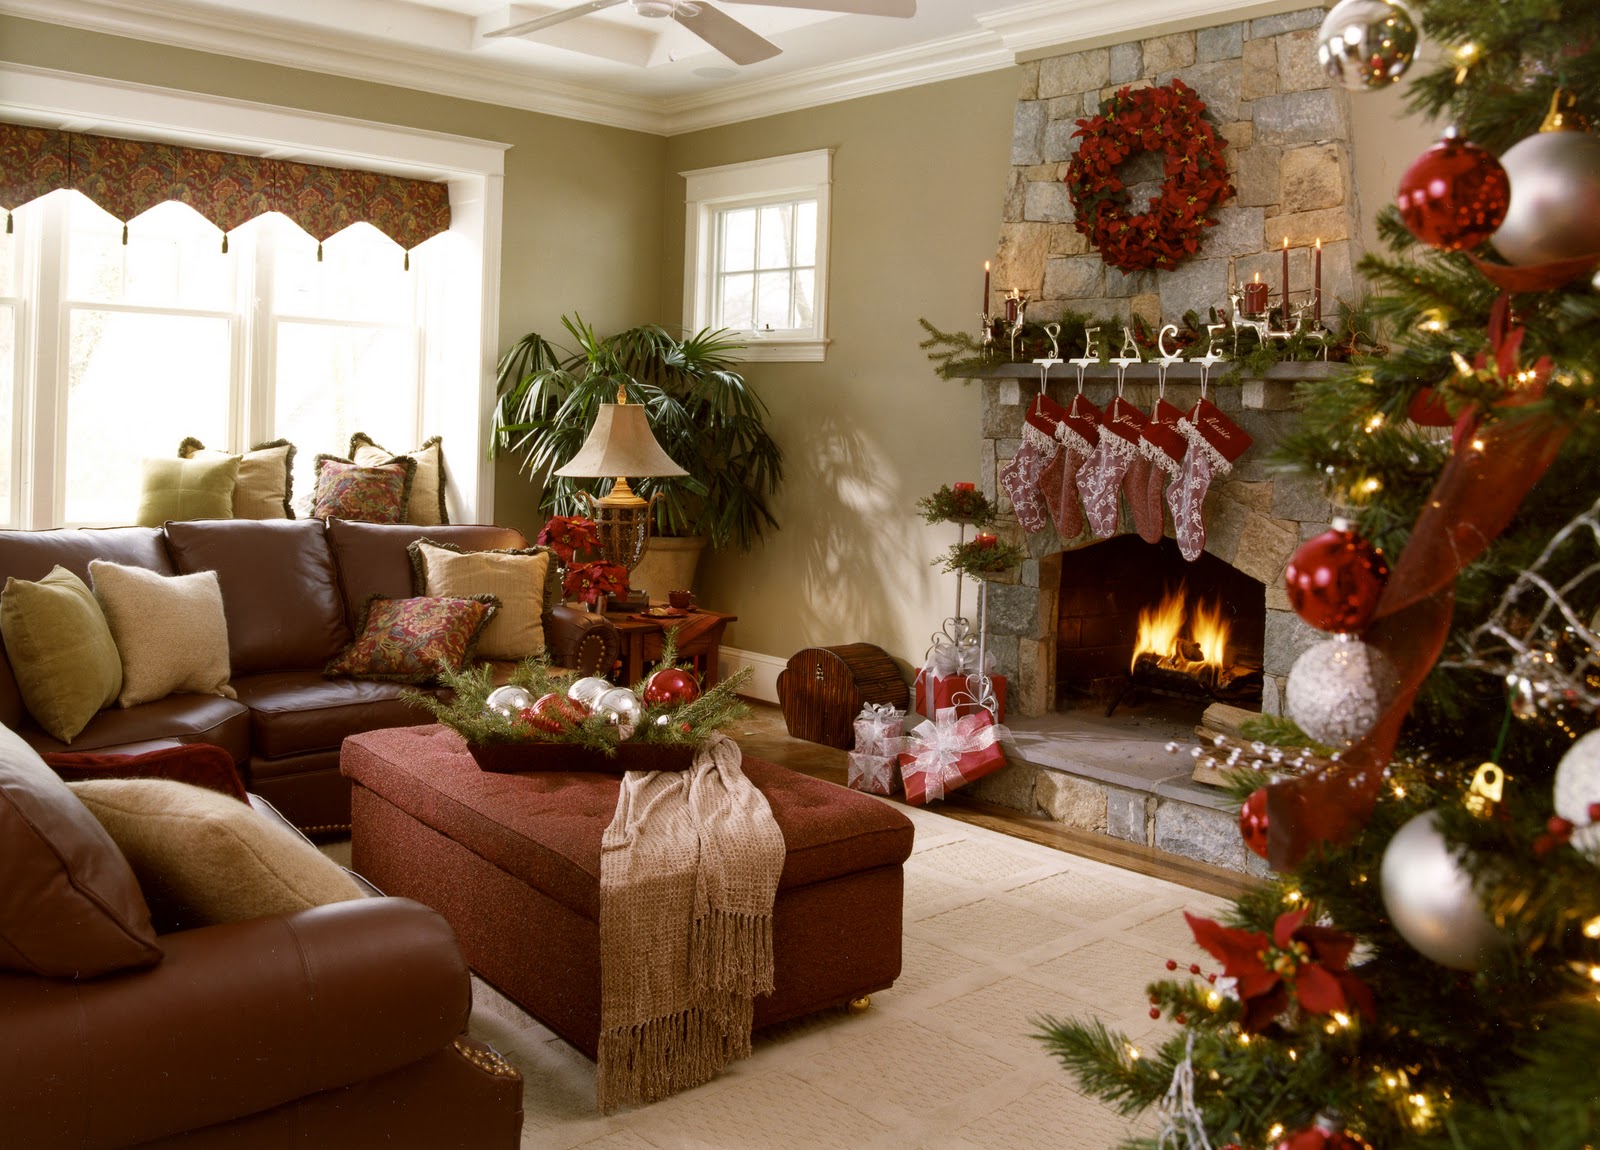 10 Christmas Decorating Ideas For Your Small Living Room